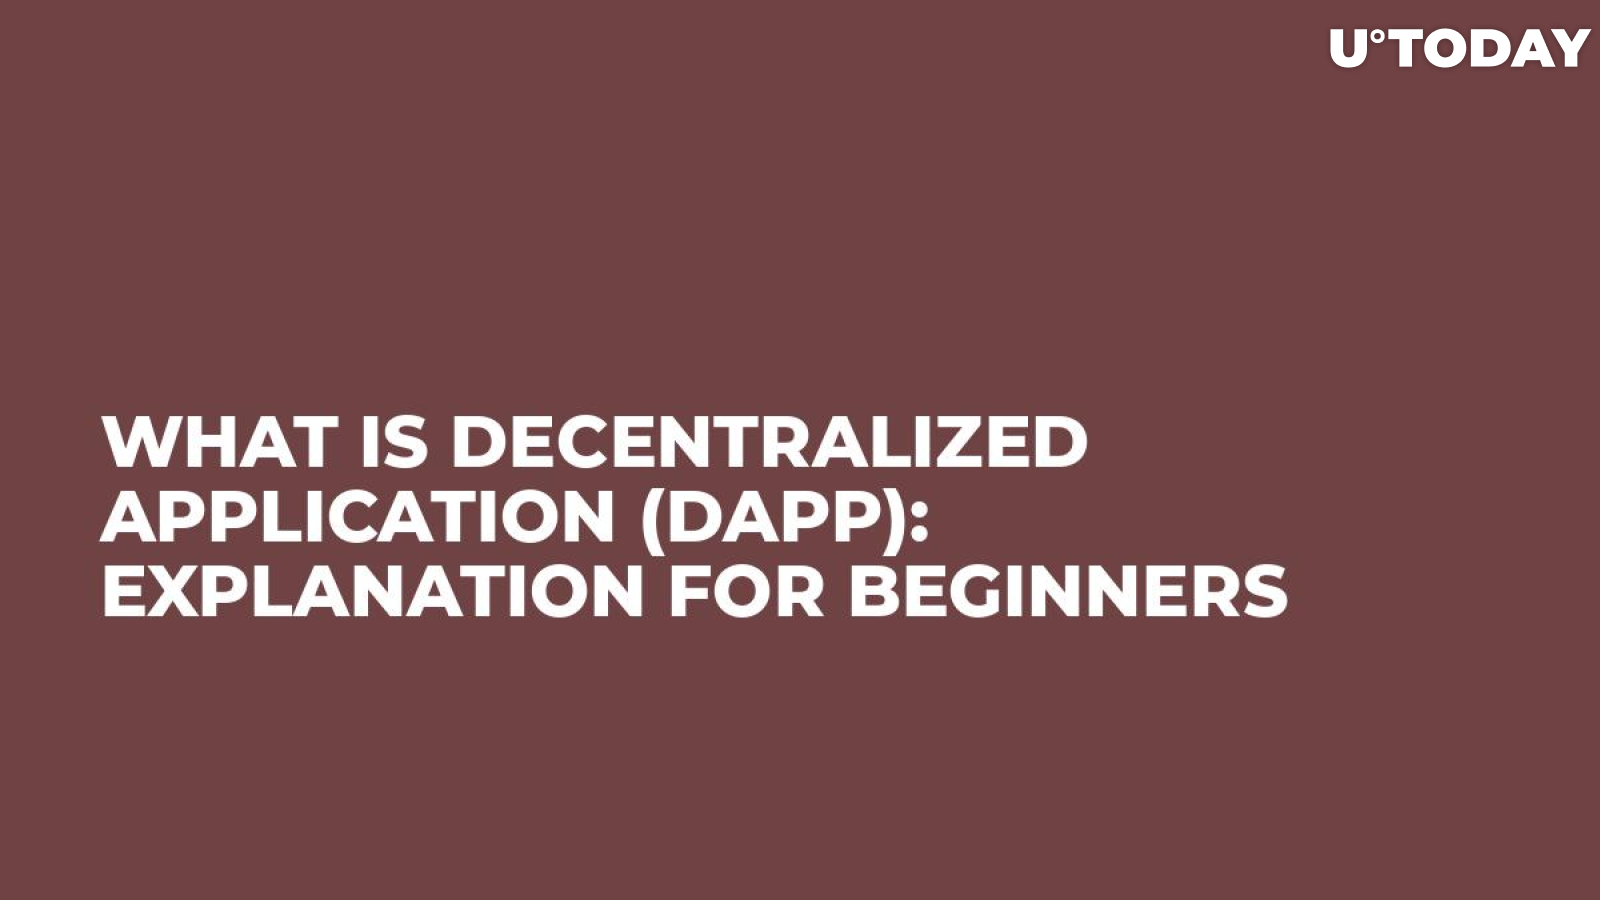 What Is Decentralized Application (dApp): Explanation for Beginners